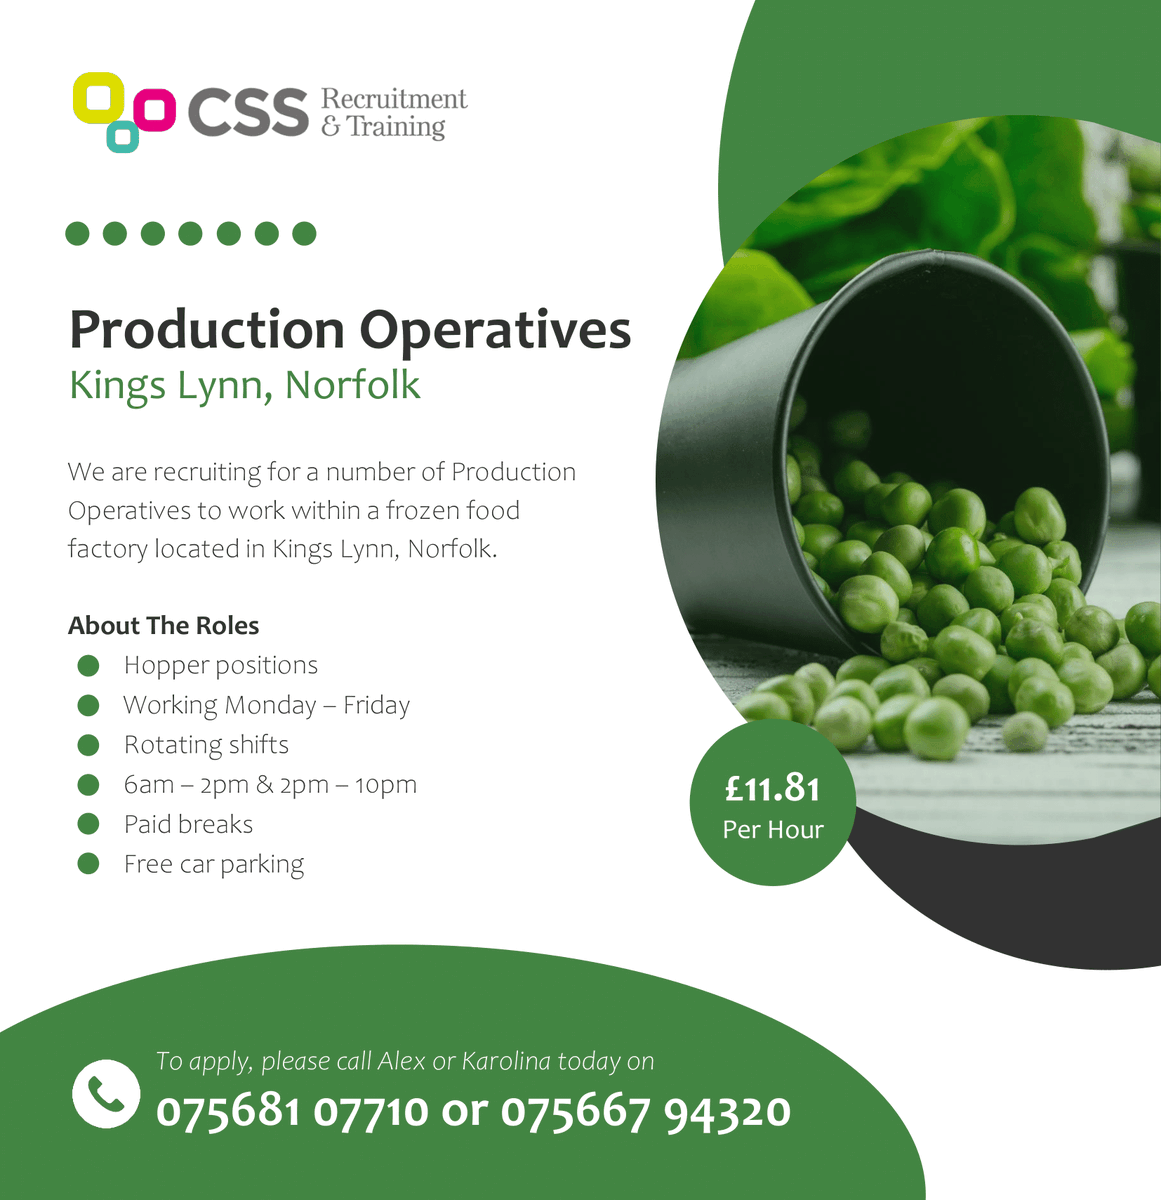 𝐖𝐄 𝐀𝐑𝐄 𝐑𝐄𝐂𝐑𝐔𝐈𝐓𝐈𝐍𝐆‼️

👉 Production Operatives
💷 £11.81 per hour
📍 Based in Kings Lynn, Norfolk

📱 To apply, please call Alex or Karolina today on 075681 07710 or 075667 94320!

#Jobs #JobSearch #ProductionOperatives #IndustrialJobs #NorfolkJobs #JobHunt